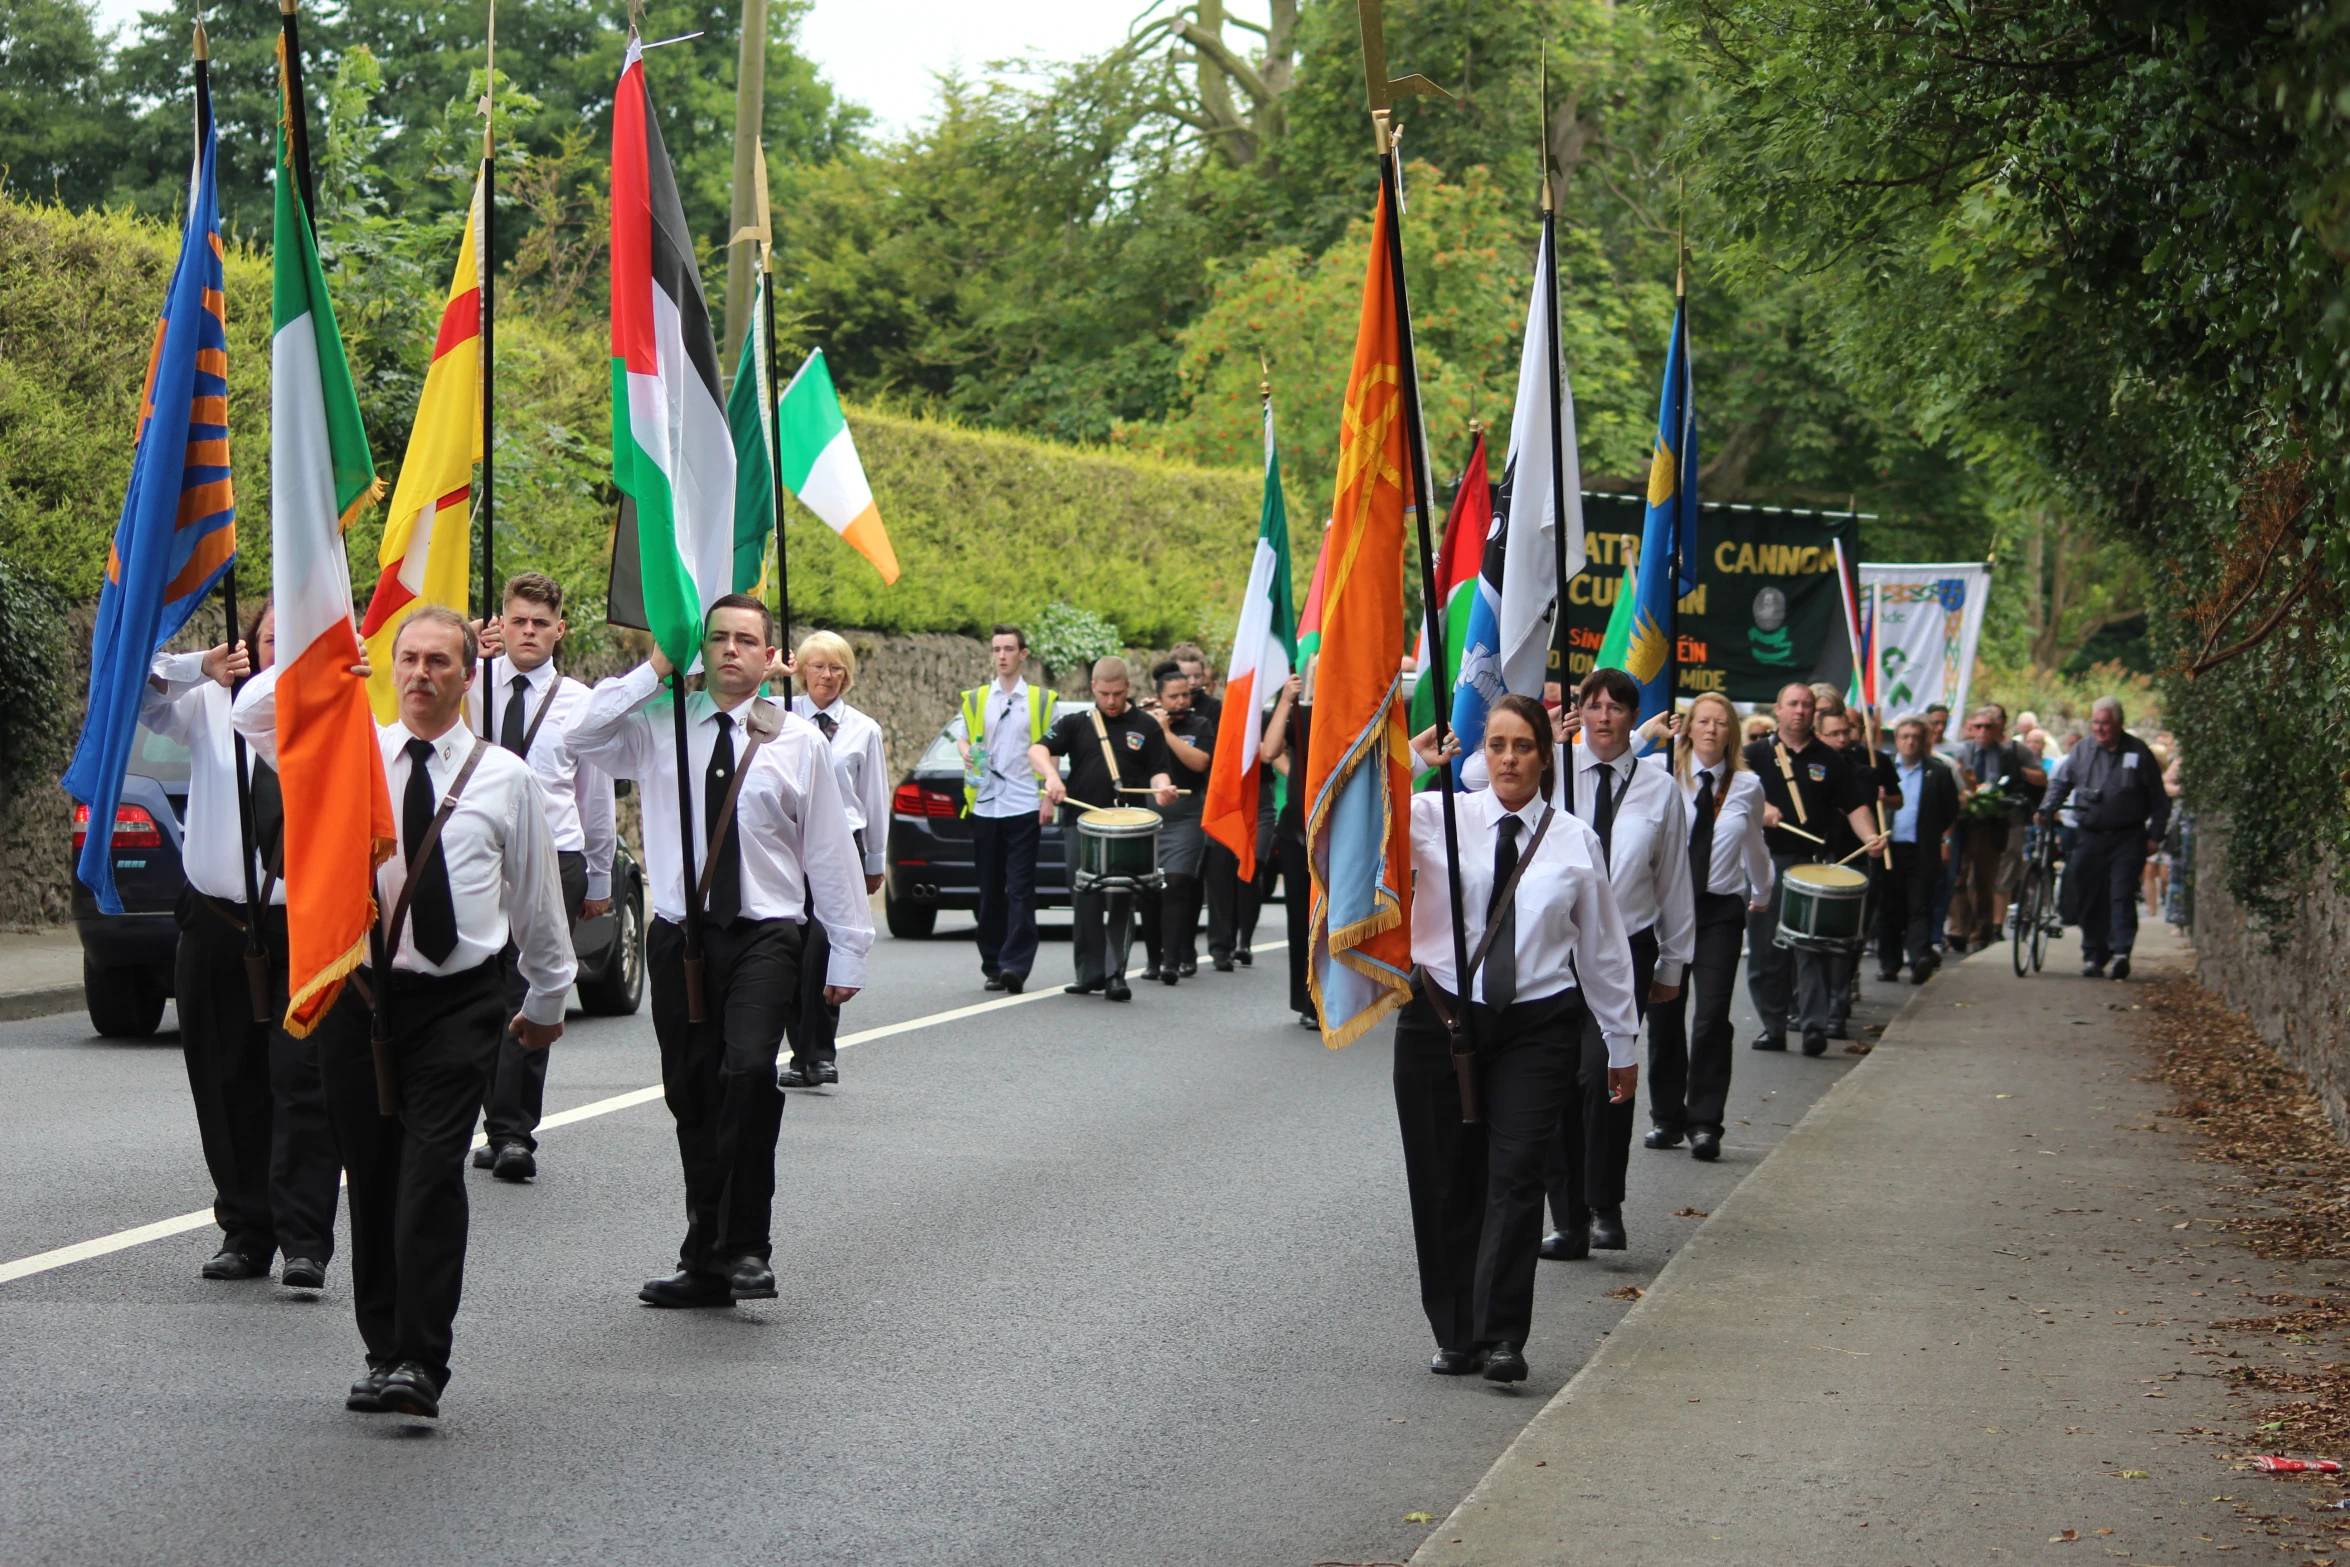 men are carrying flags down the street in formation